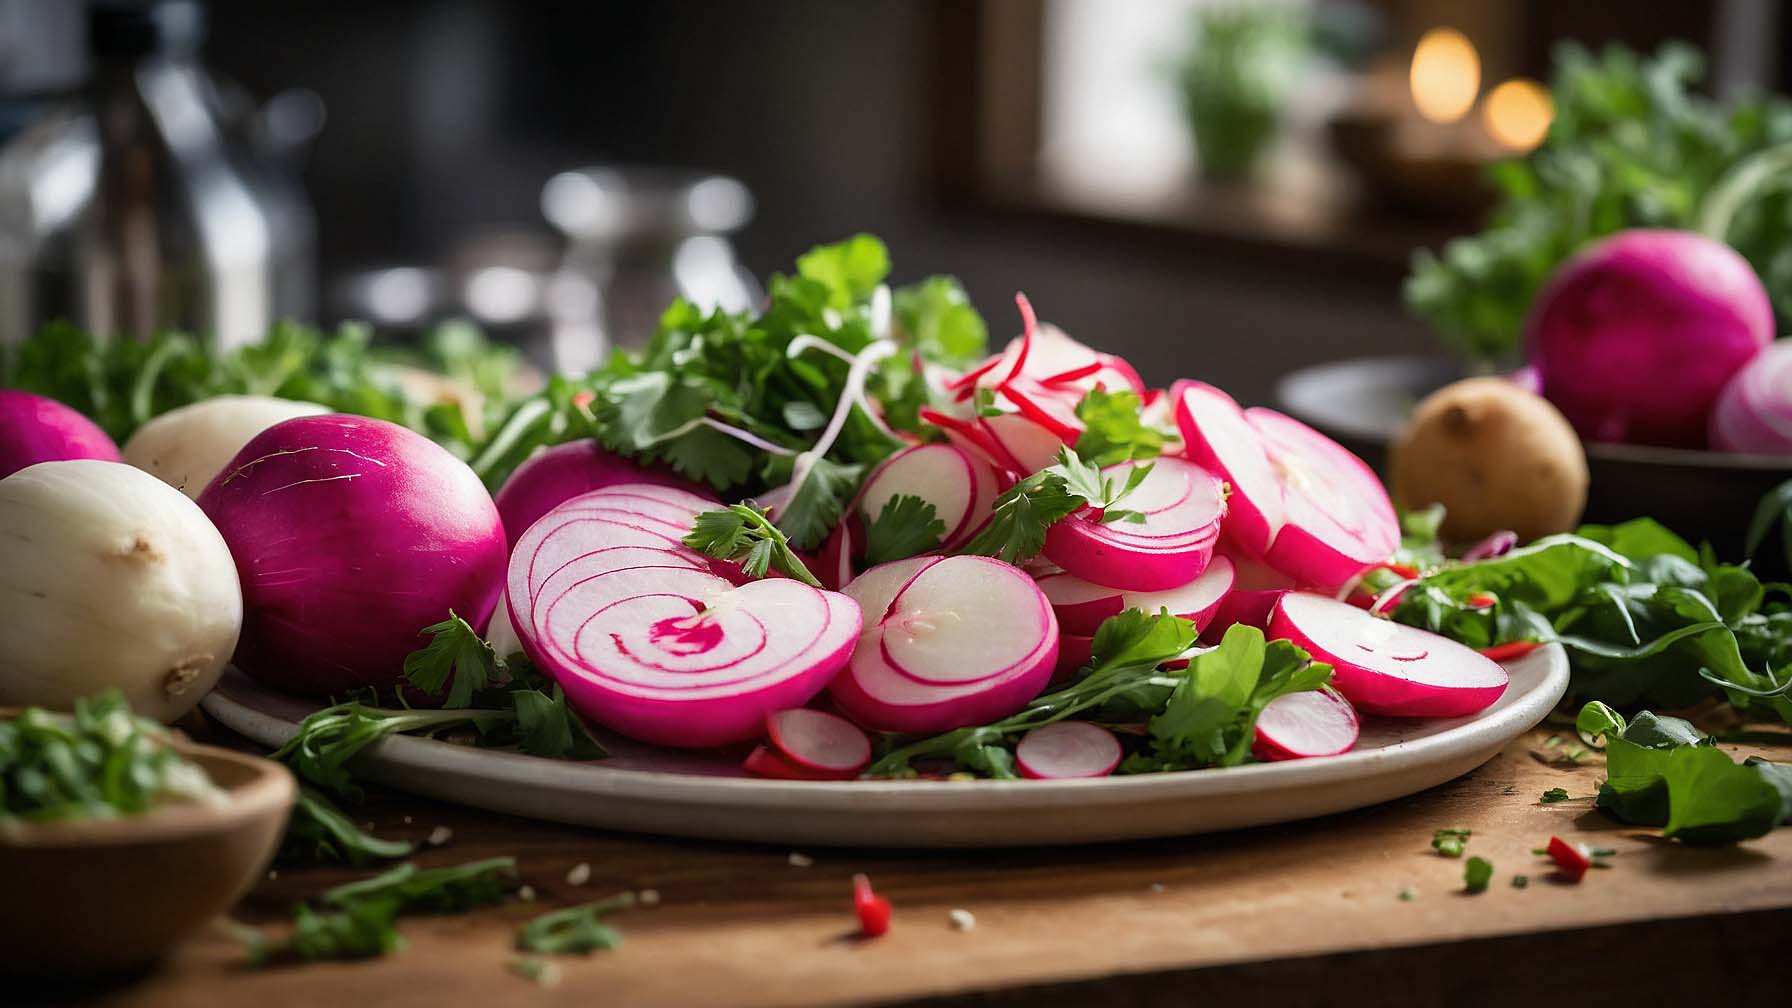 Turnips and Radishes Recipe: A Vibrant Fusion of Flavors